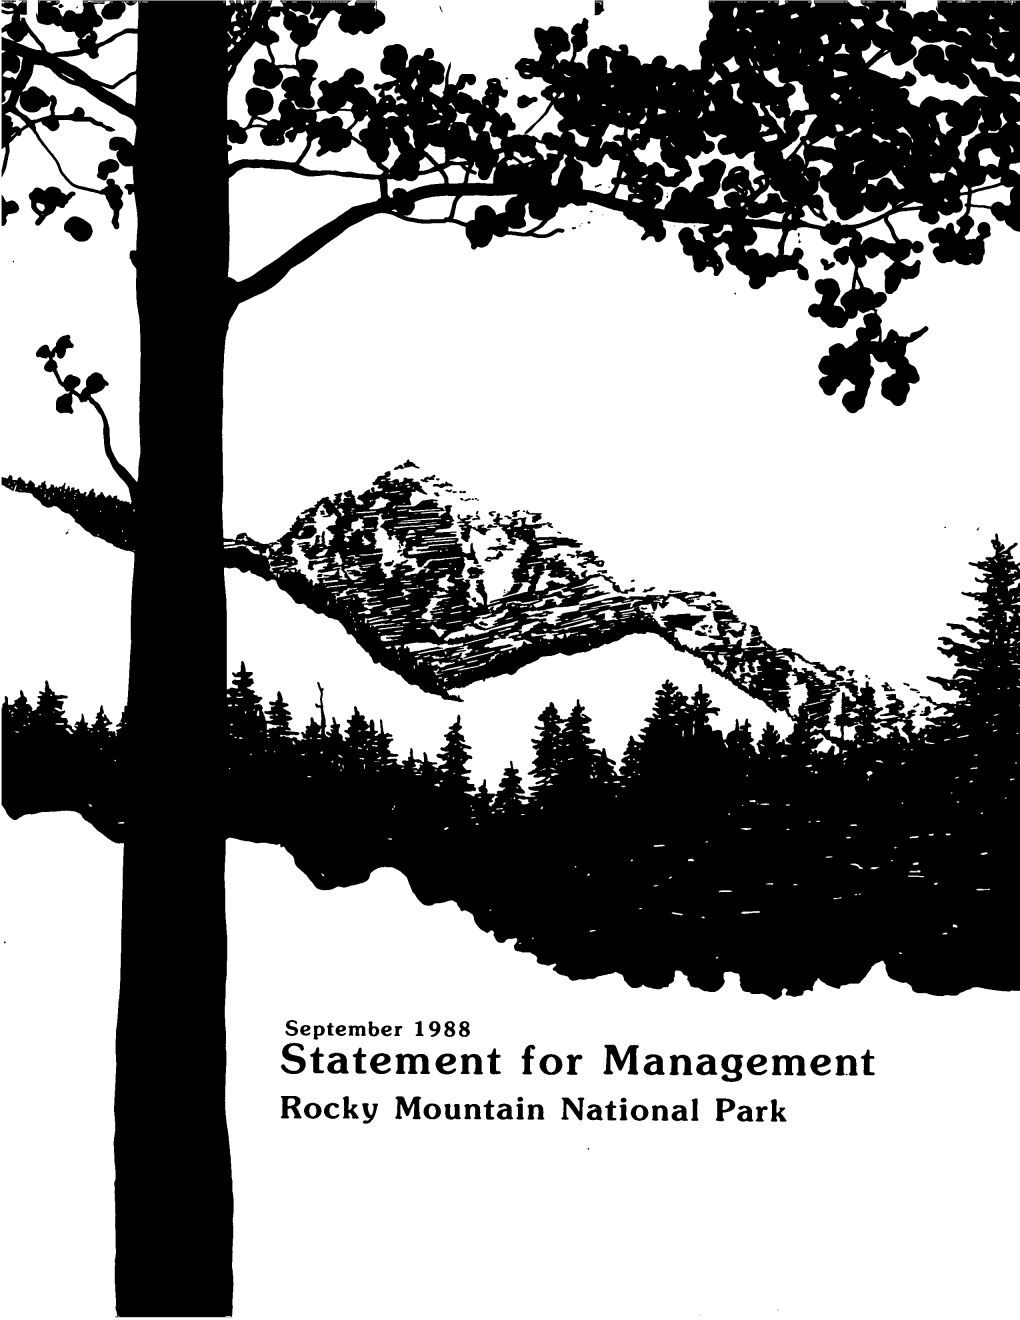 Statement for Management